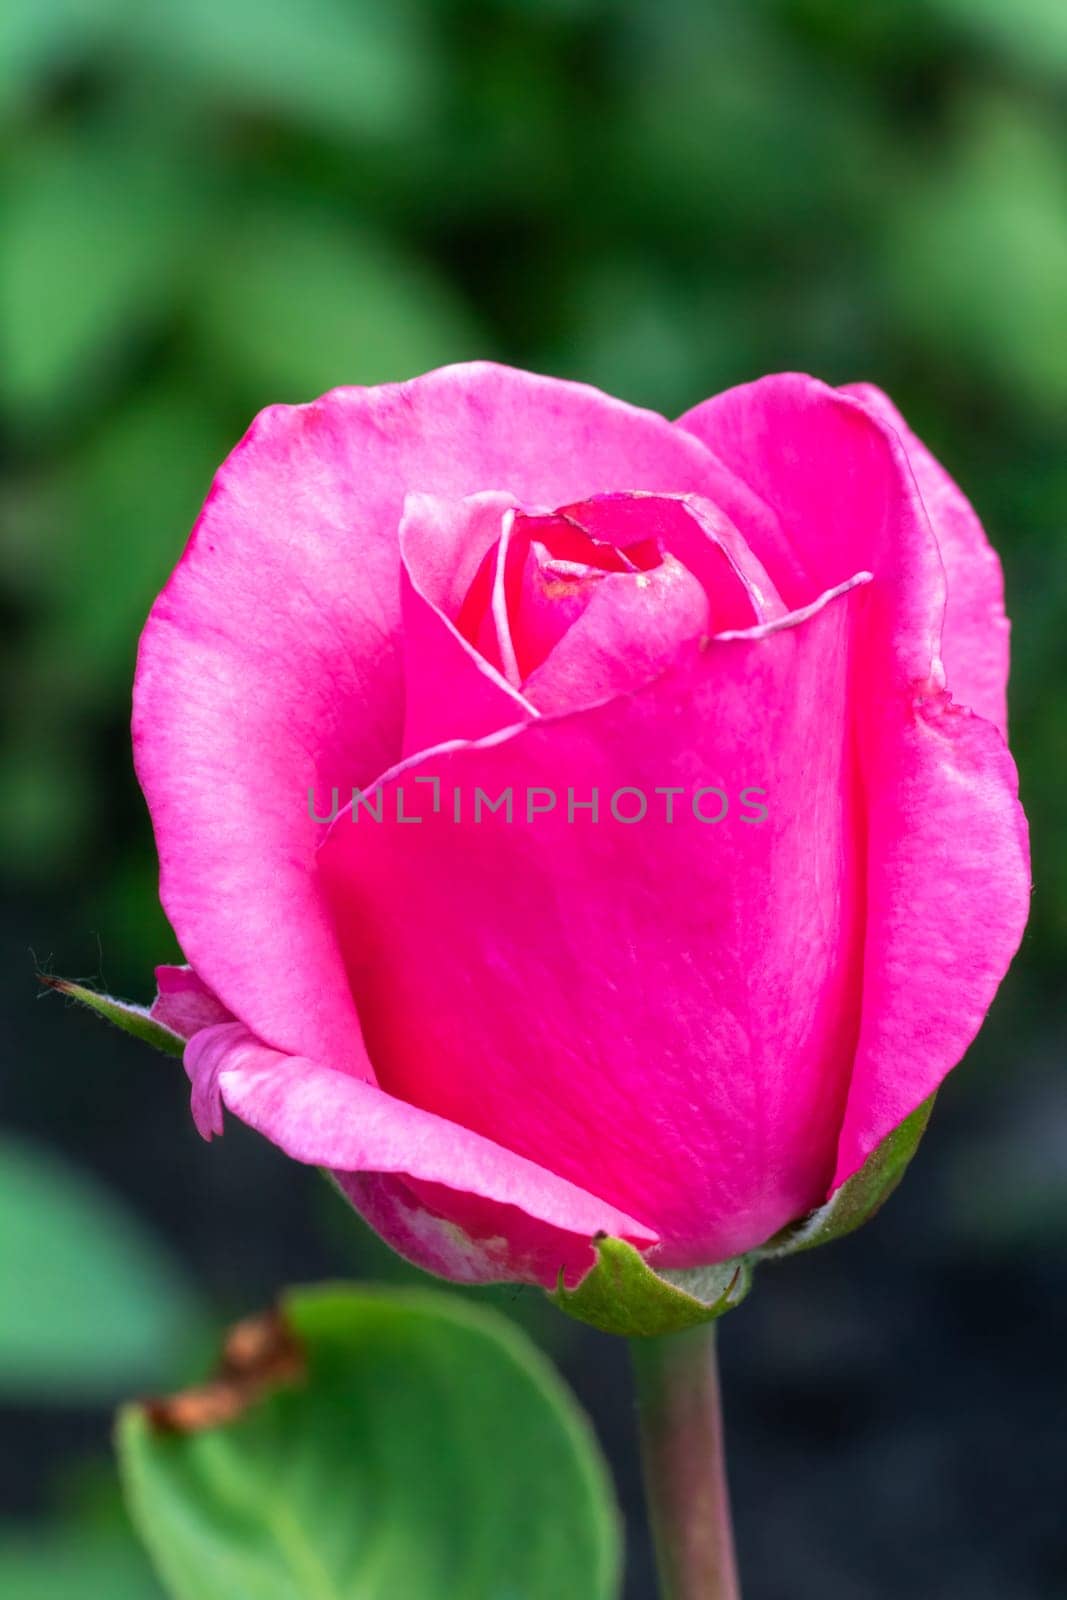 Rose bud on a stem with a garden on the background. by mvg6894